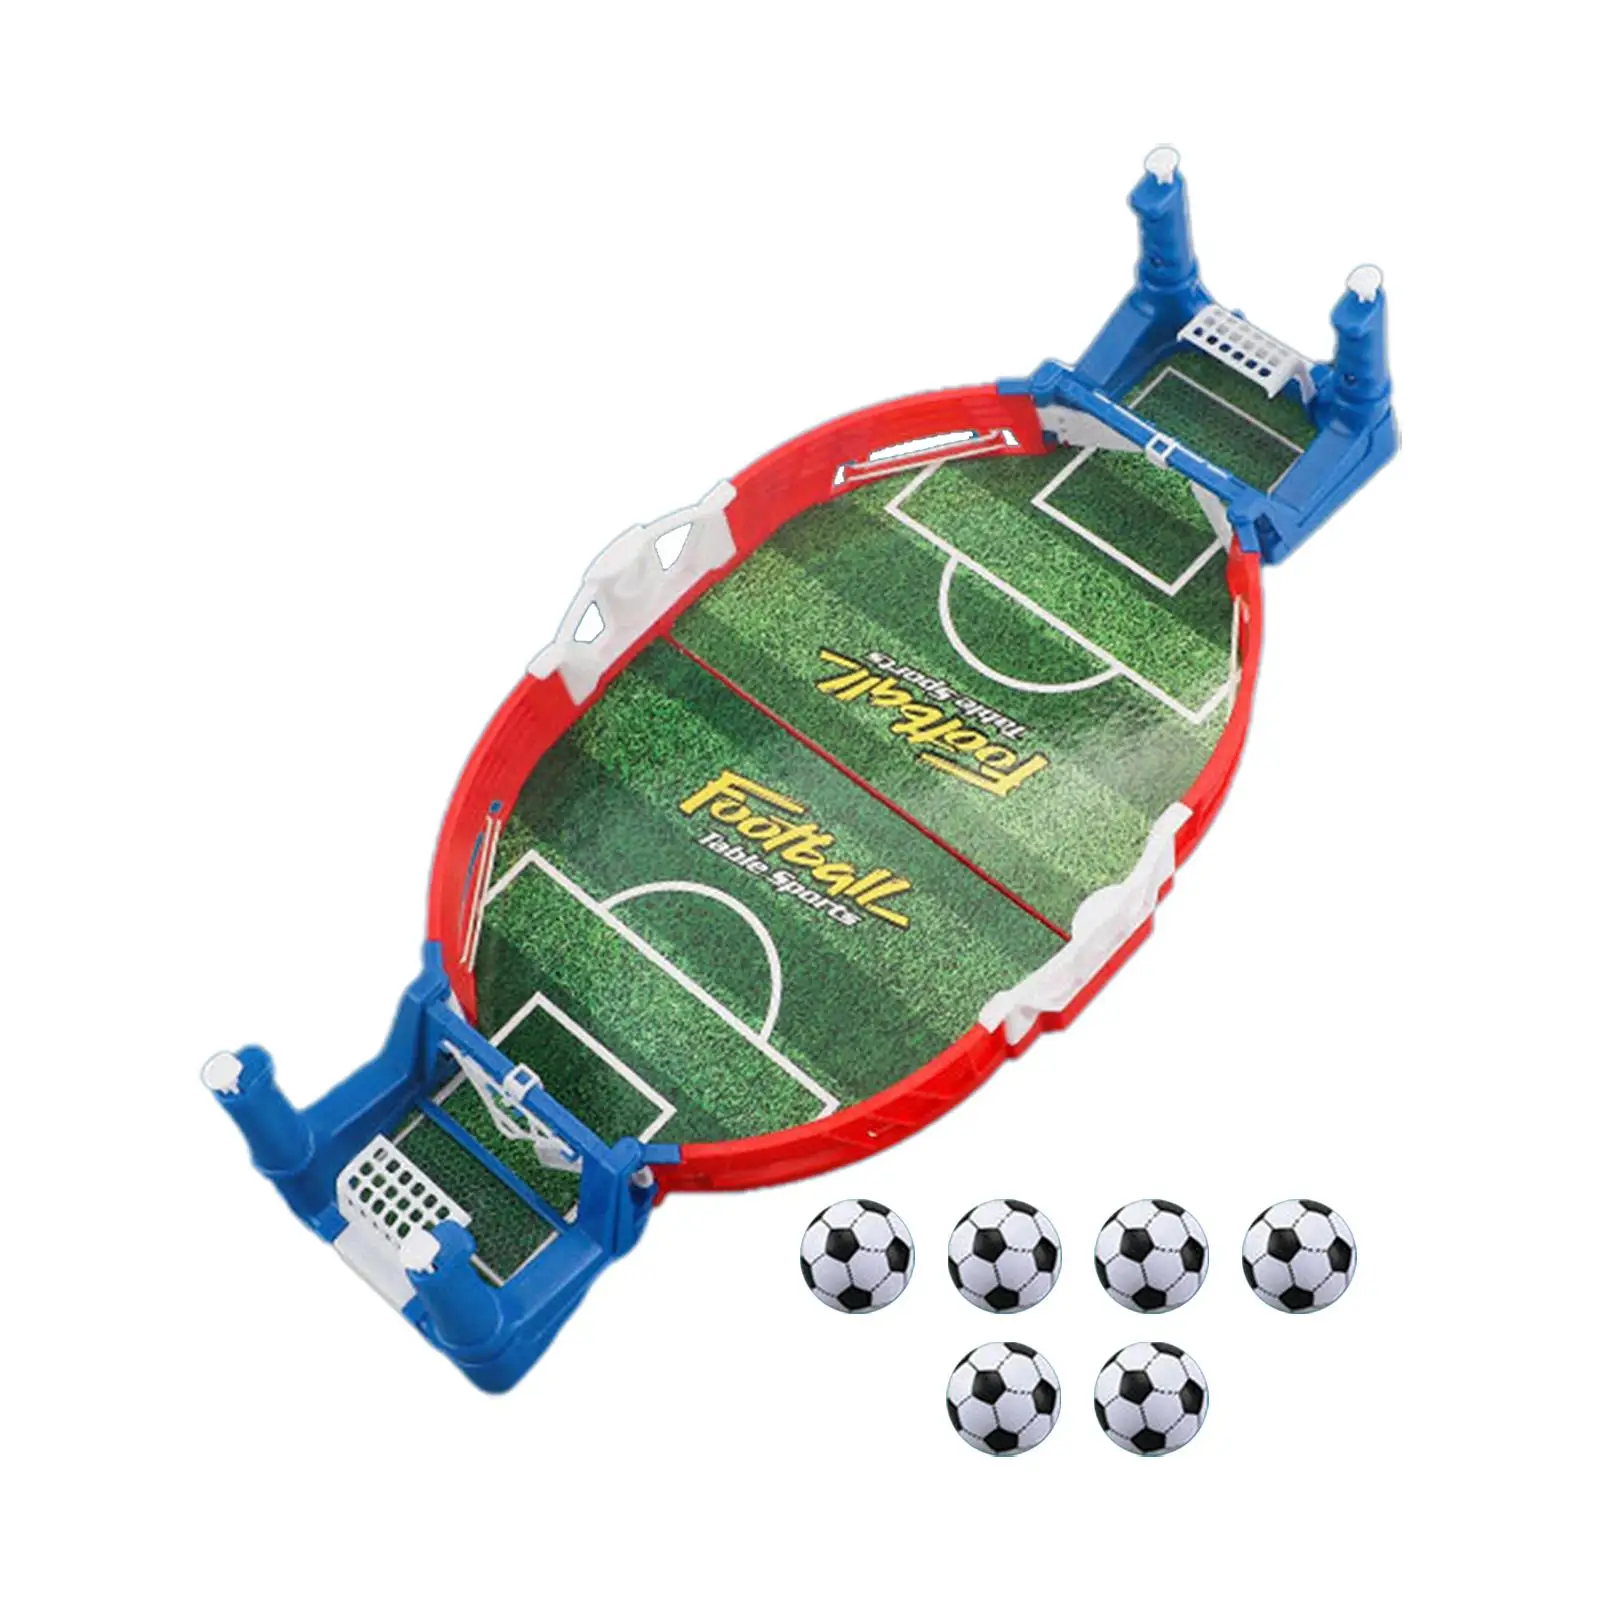 Desktop Football Board Games Kit Toy Sports Table Board Football Game Interactive Toys Funny Football Game for Boys Family Girls